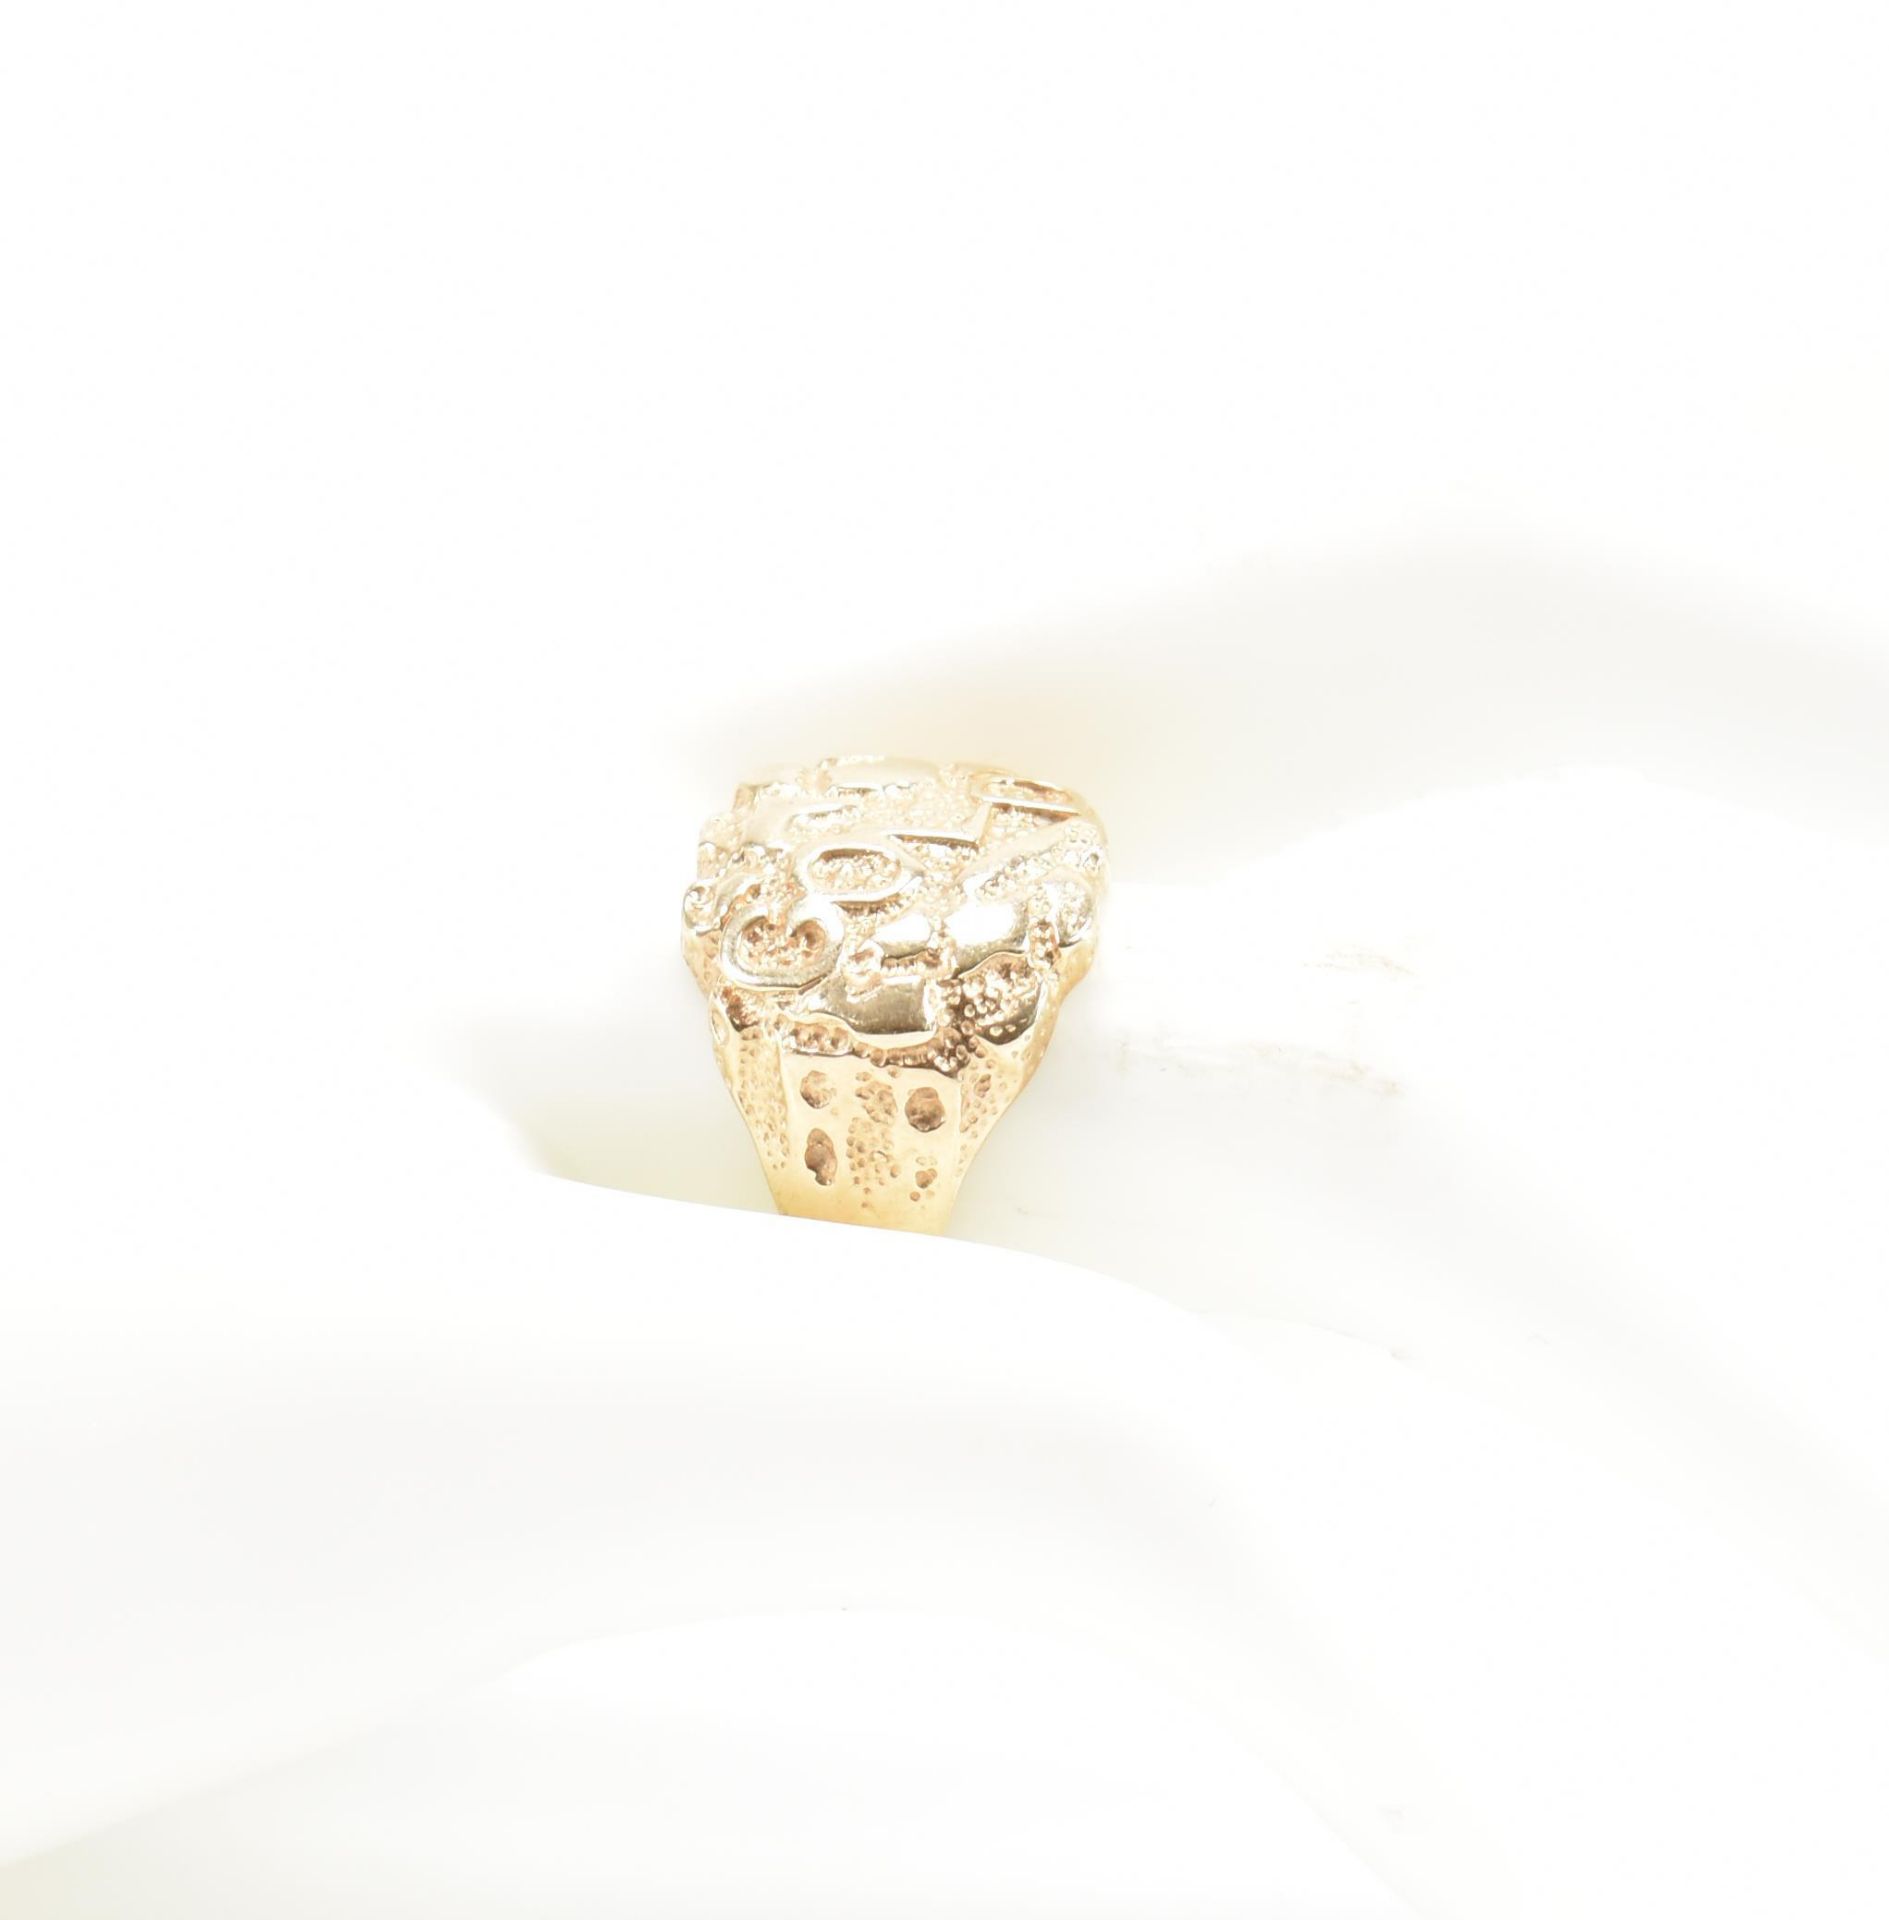 HALLMARKED 9CT GOLD NUGGET RING - Image 9 of 9